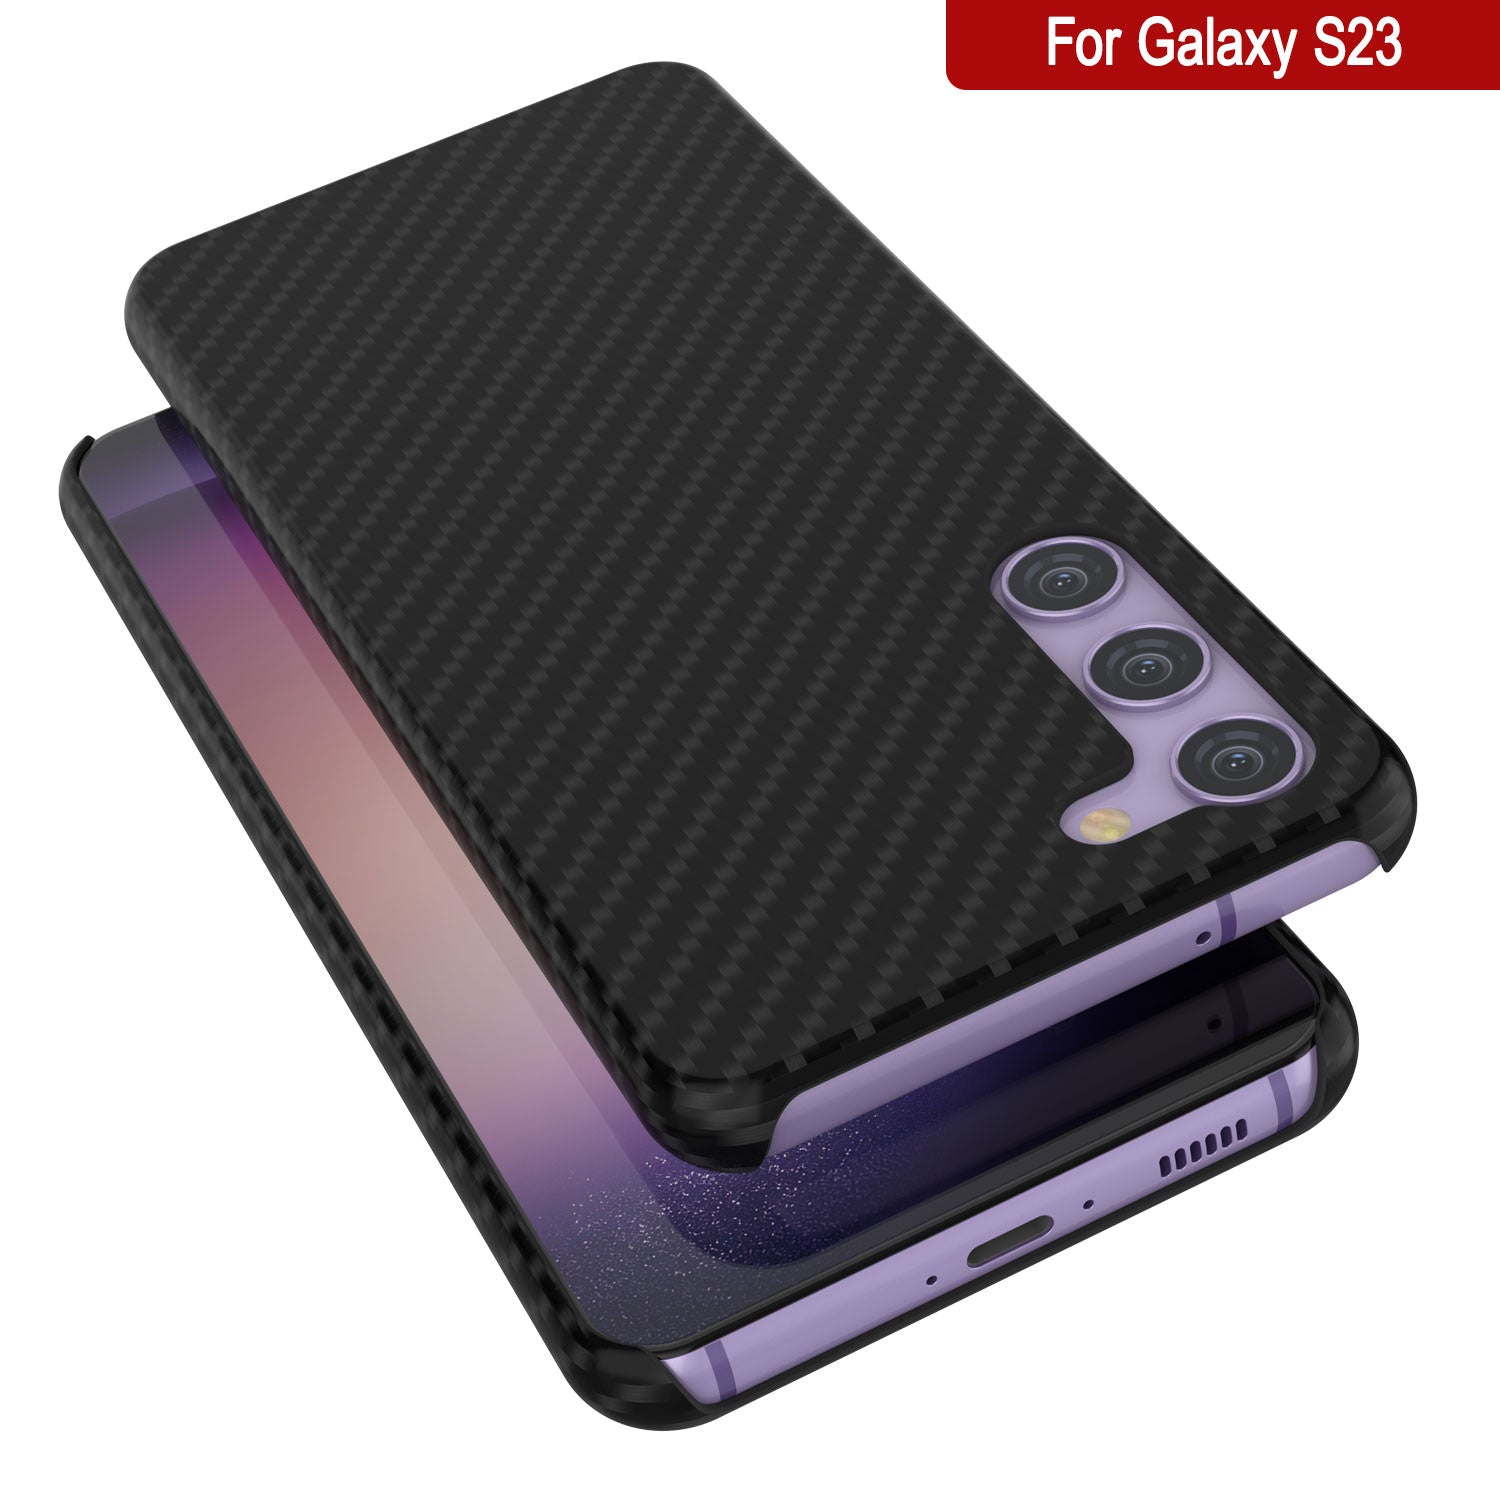 Galaxy S23 Case, Punkcase CarbonShield, Heavy Duty & Ultra Thin 2 Piece Dual Layer PU Leather Black Cover (Carbon Fiber Style)